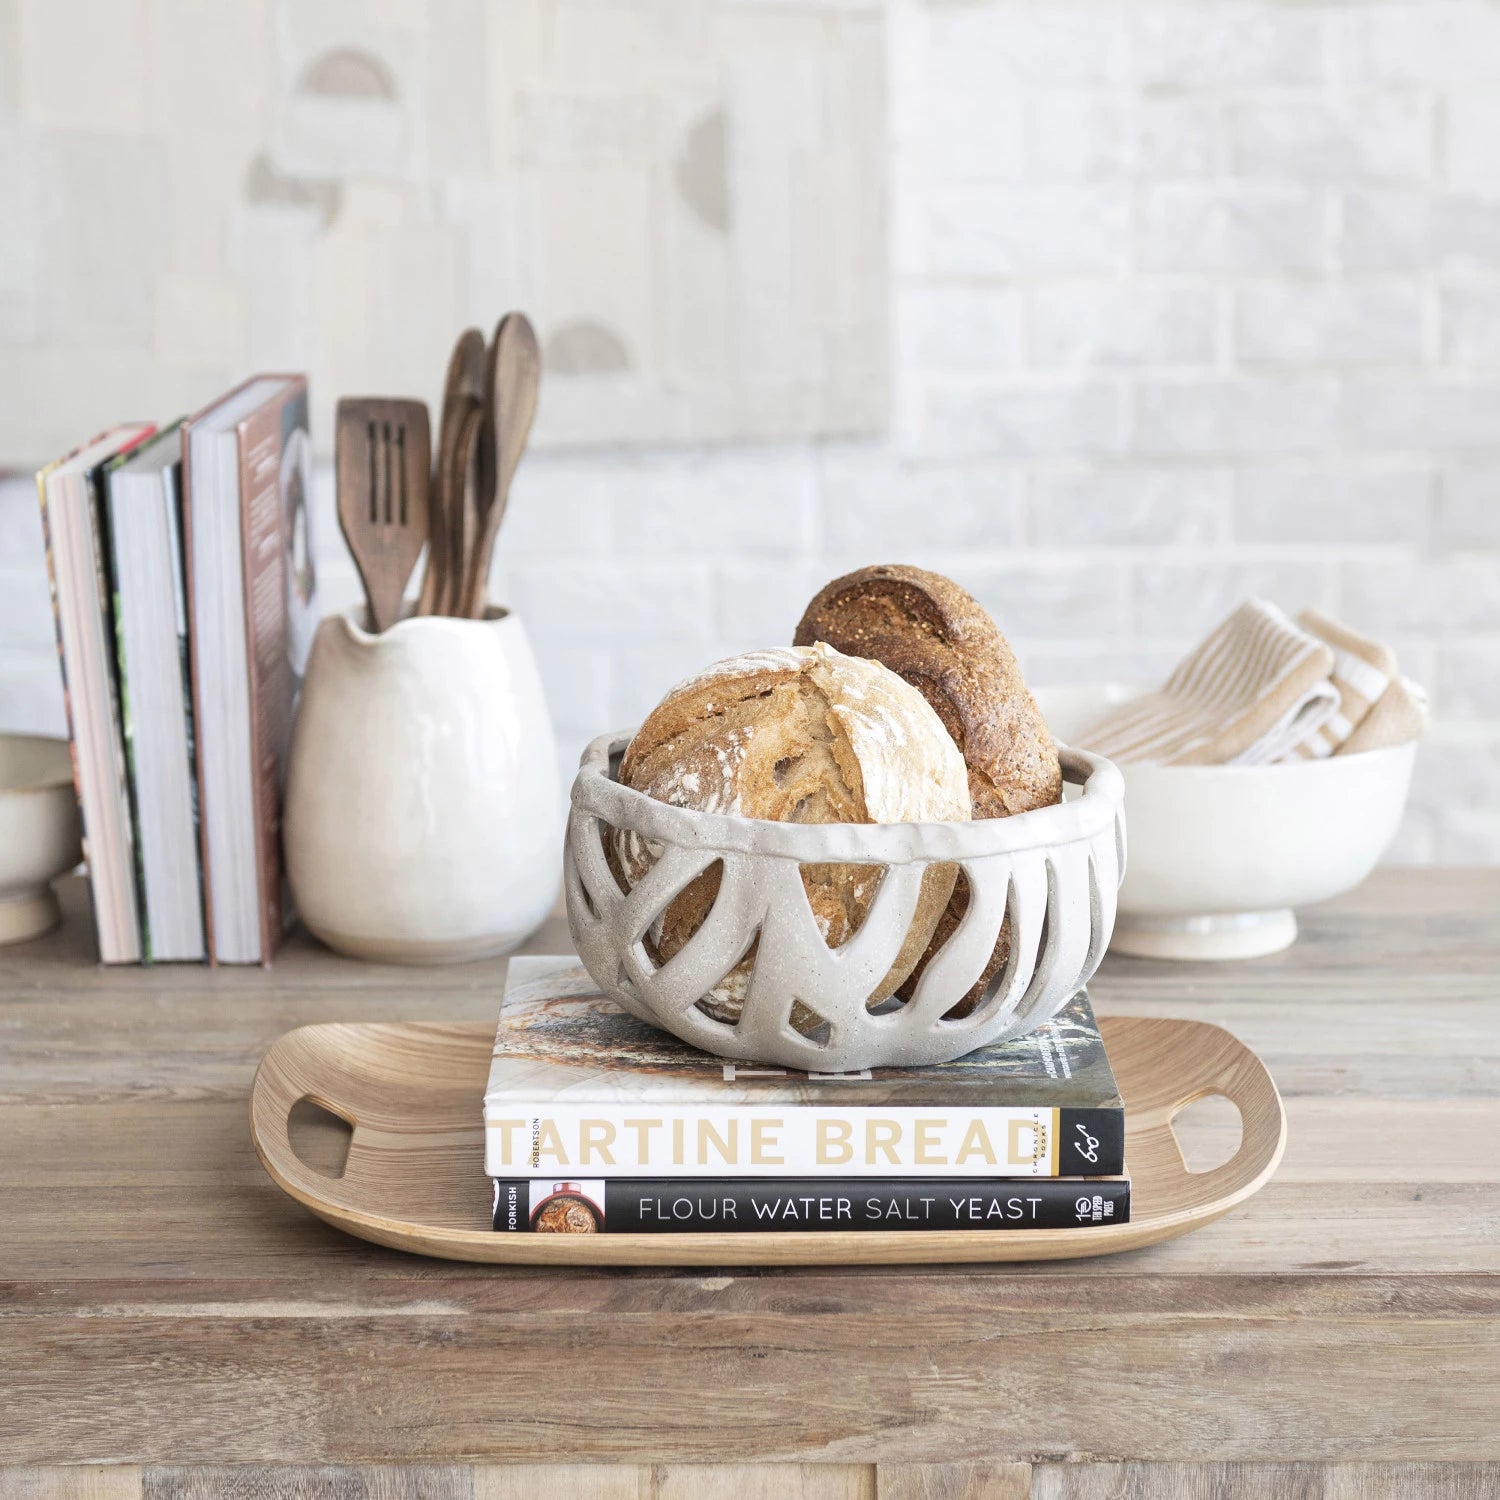 A rustic bungalow-style kitchen setting featuring a ceramic bowl with fresh bread on a Bloomingville Natural Oak Wood Serving Tray, which rests atop a &quot;Tartine Bread&quot; cookbook. Cooking utensils and books are in the background on a wooden counter.